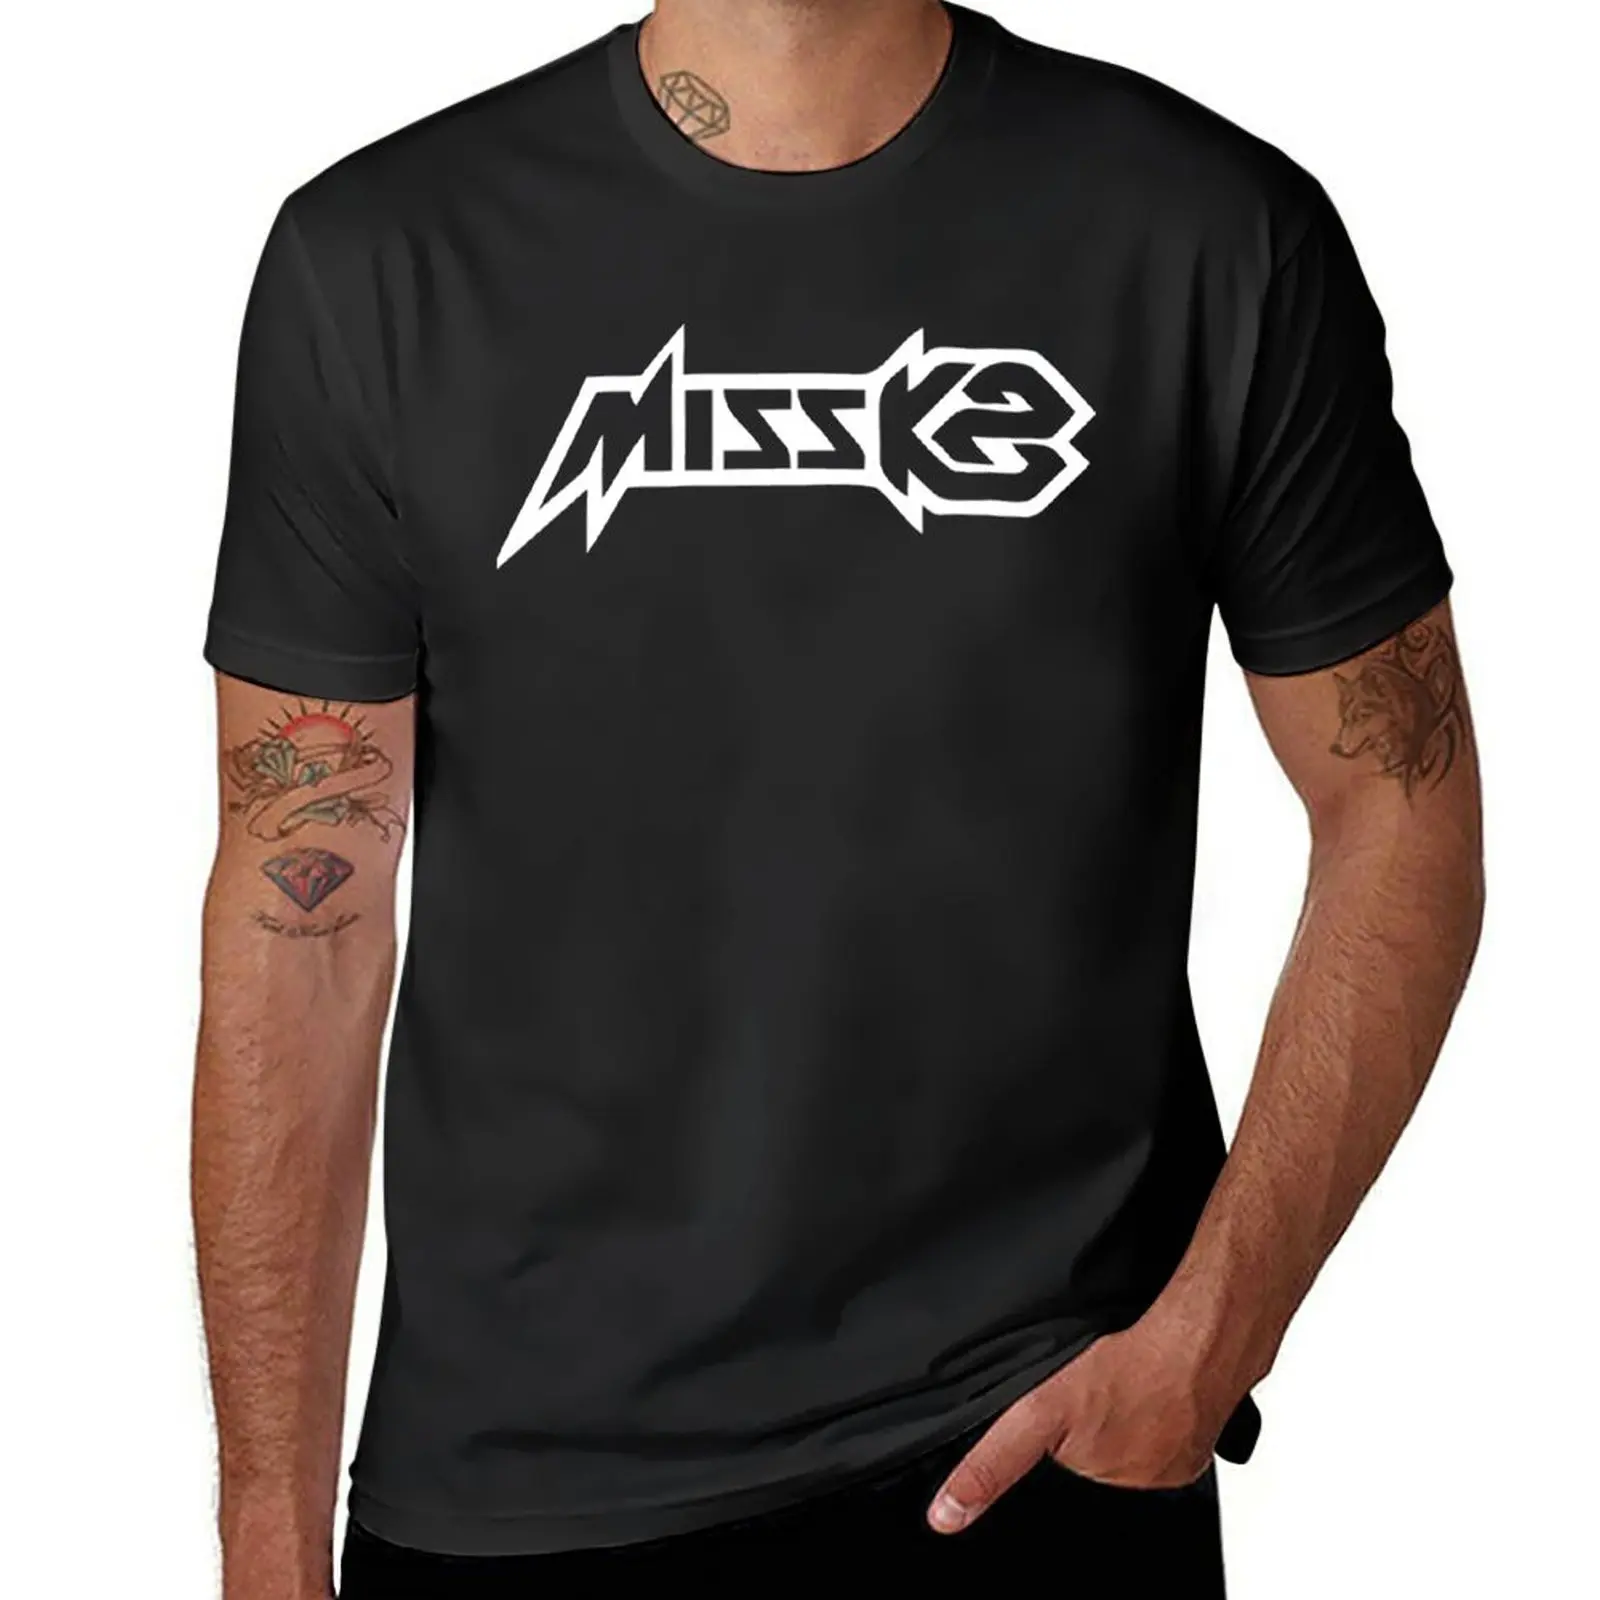 

New BEST SELLING - Miss K8 Logo T-Shirt anime clothes plus size tops t shirts for men pack